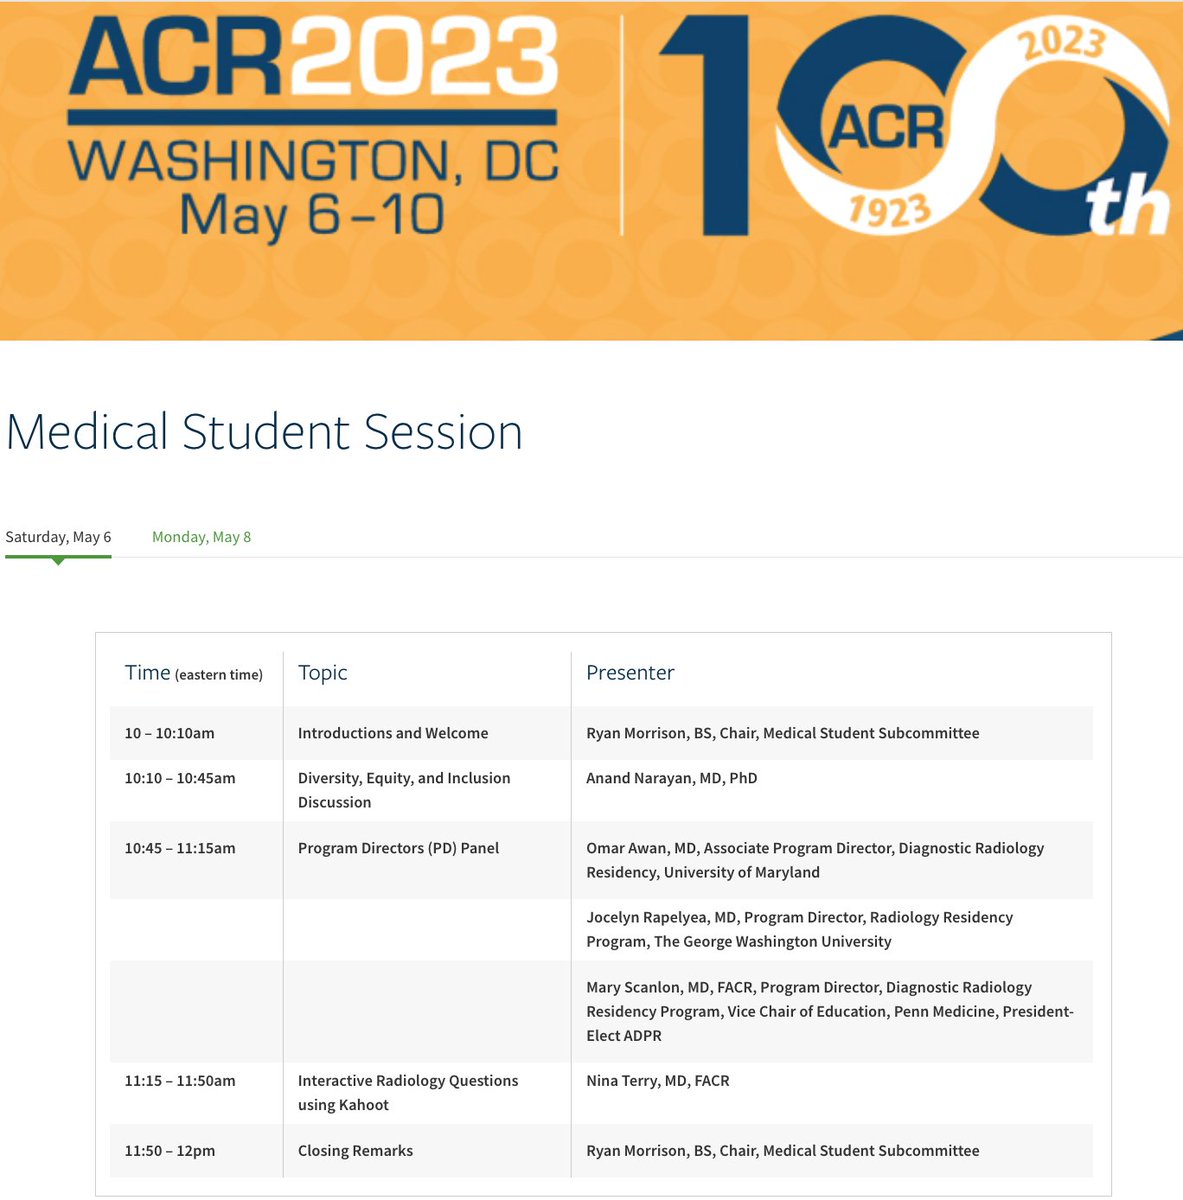 #MedTwitter I am excited to announce the @RadiologyACR 2023 Meeting will have its first ever dedicated medical student programming! Register BEFORE April 13 to get FREE registration (either in person or virtual) acr.org/Lifelong-Learn… @AwanRad @AnandKNarayan @JoanPowersLynch